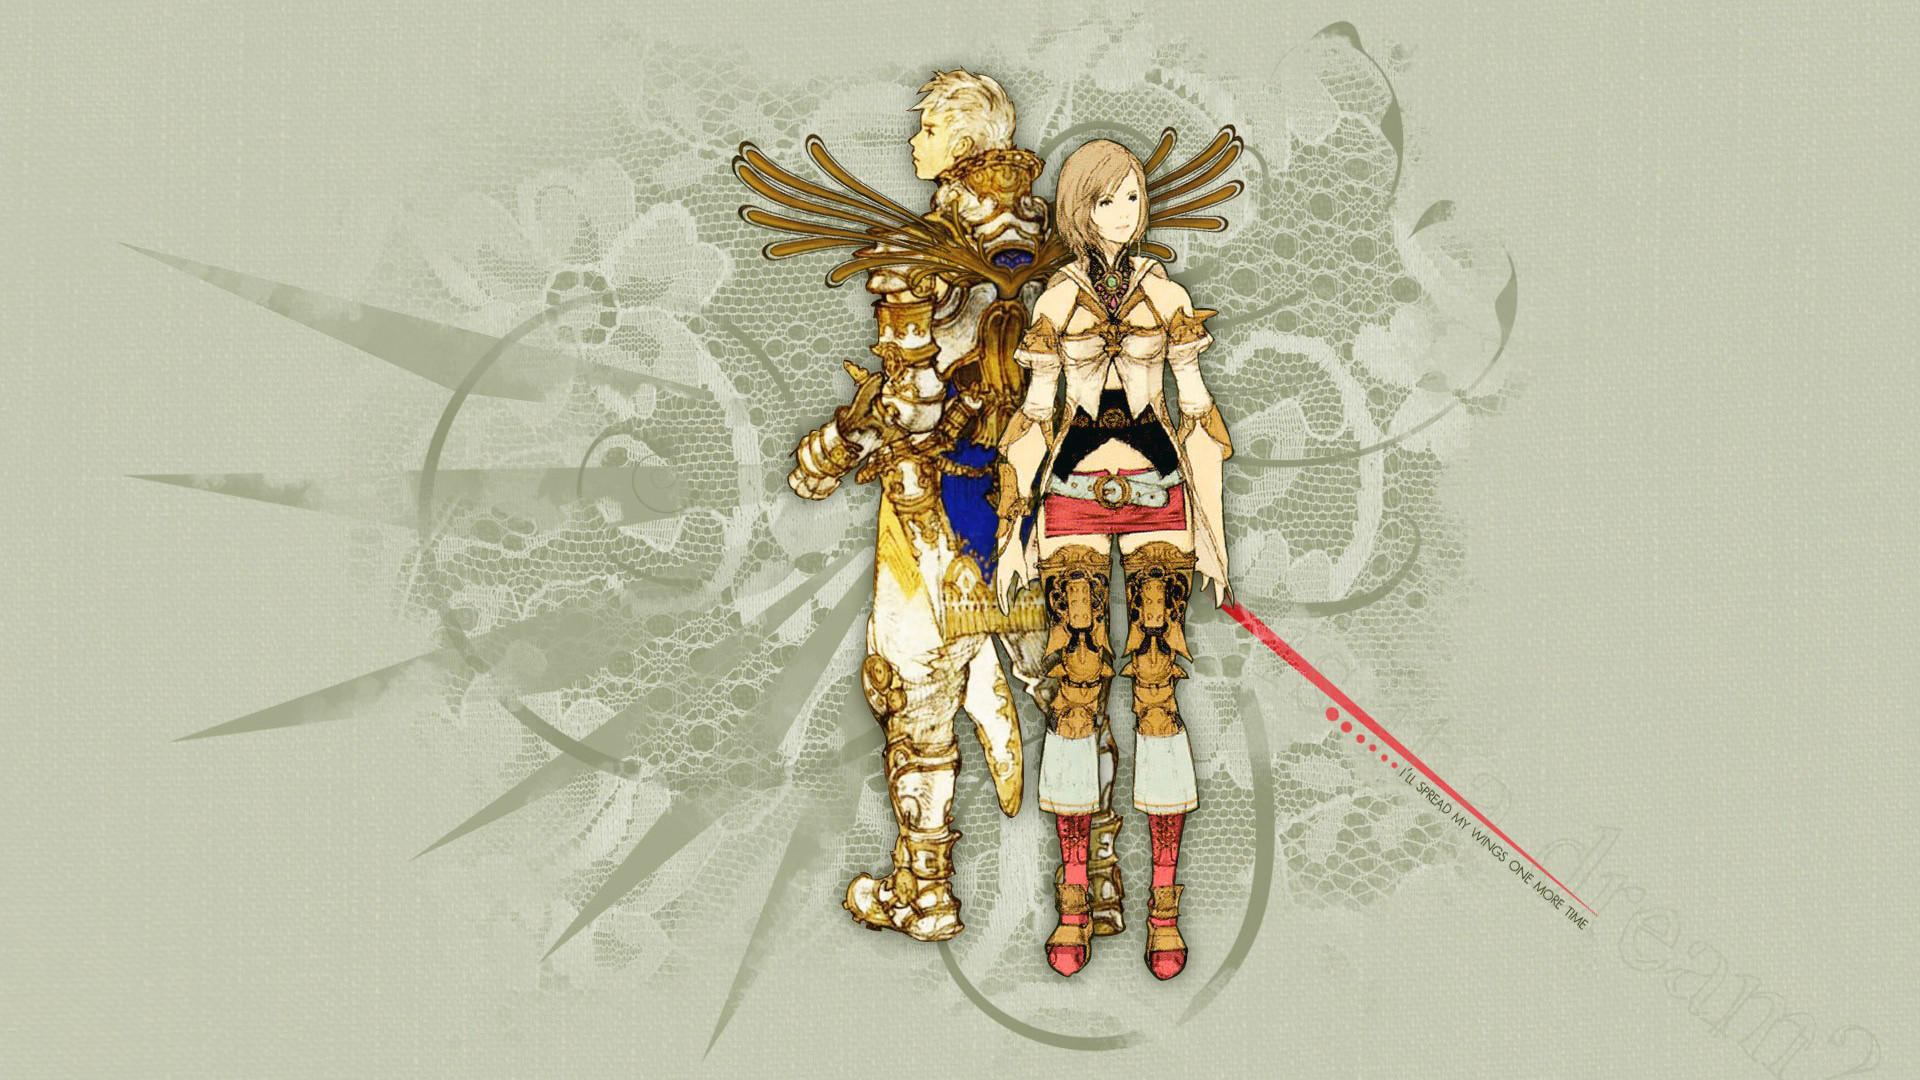 Video Game Final Fantasy XII HD Wallpaper Background Image. 